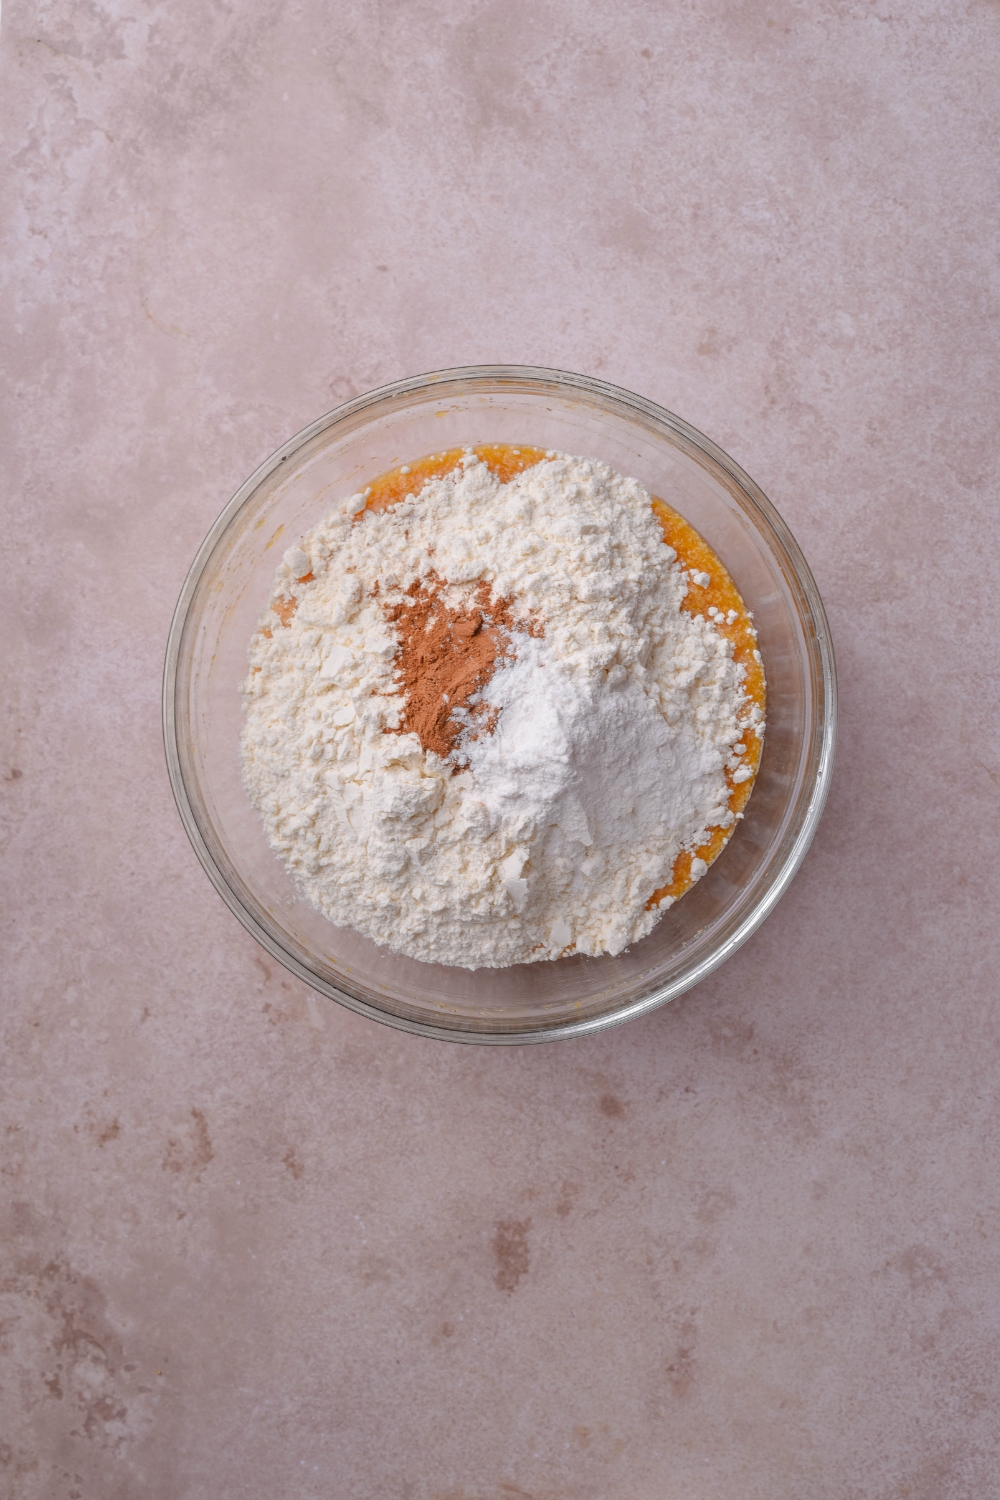 A clear bowl filled with flour, baking powder, and spices.